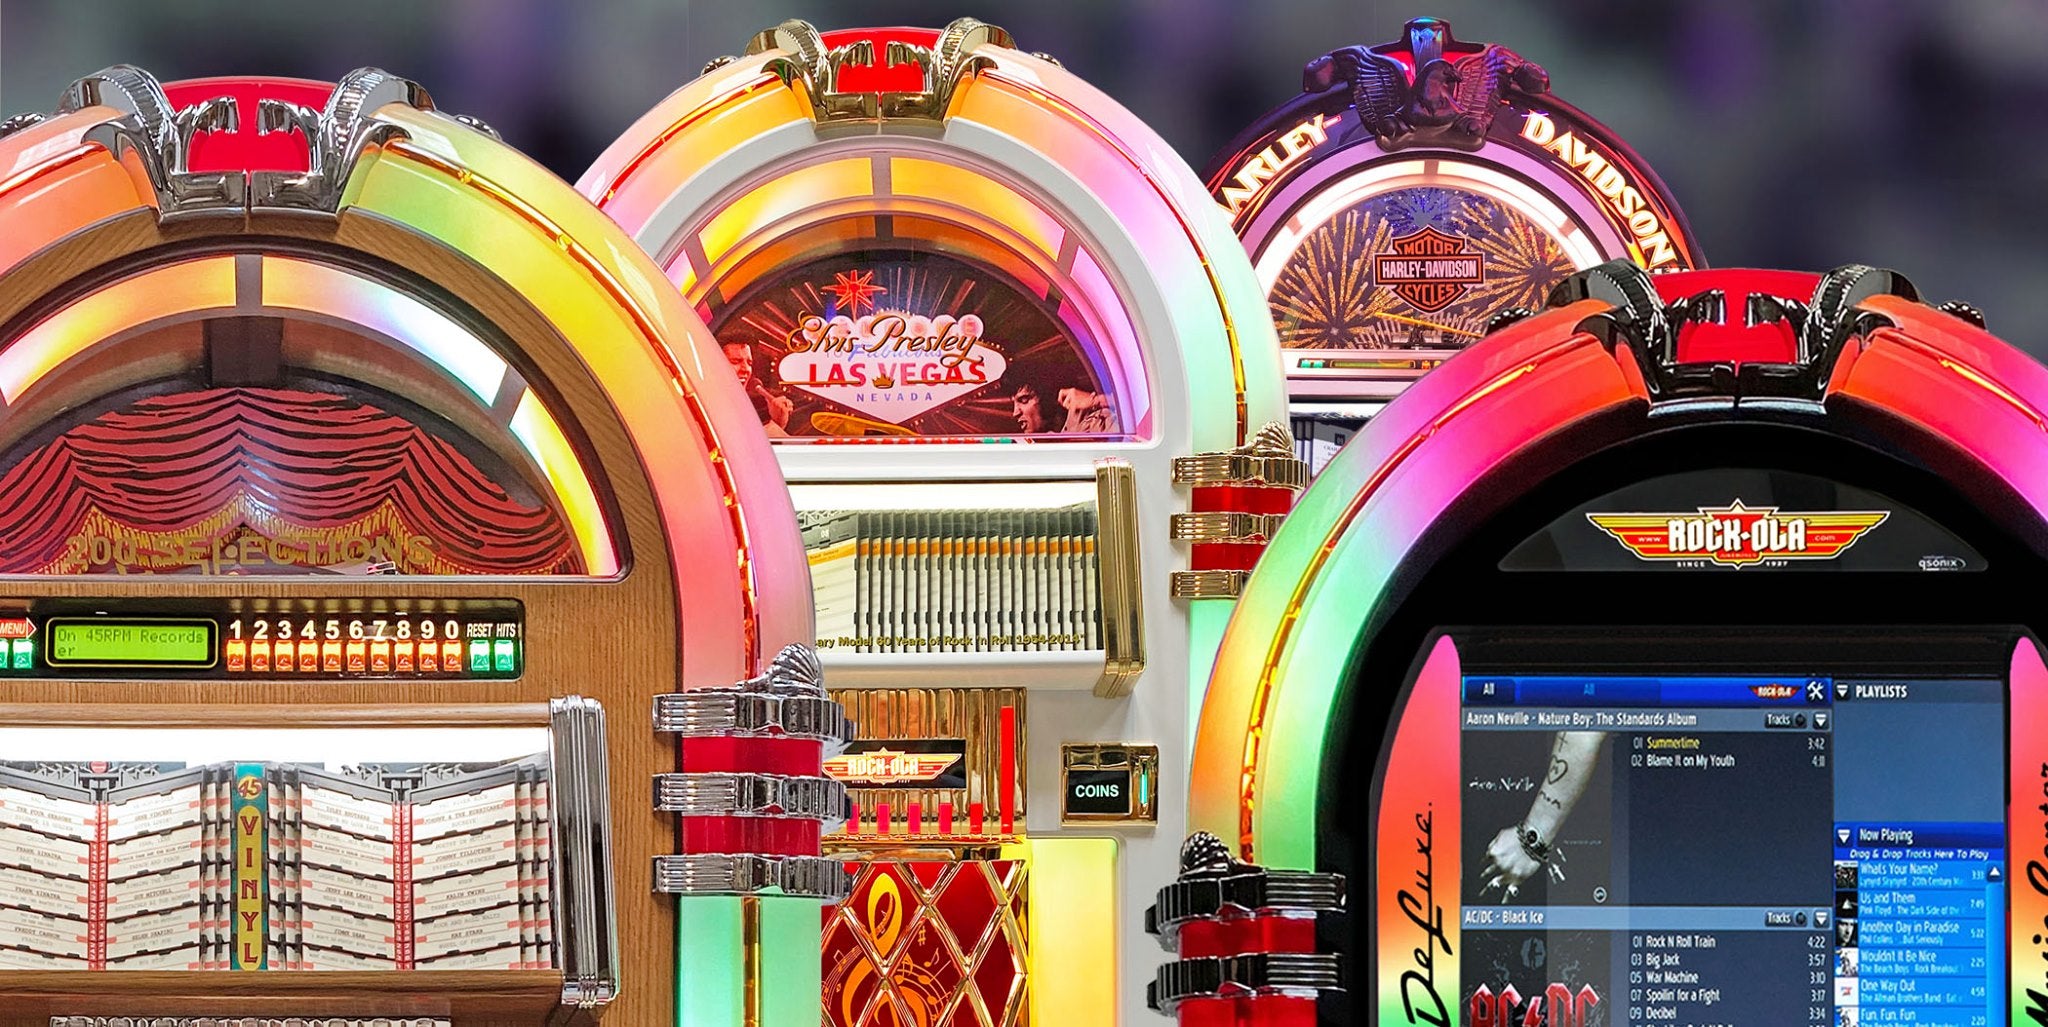 Why Rock-Ola Leads The World In Manufacturing Jukeboxes